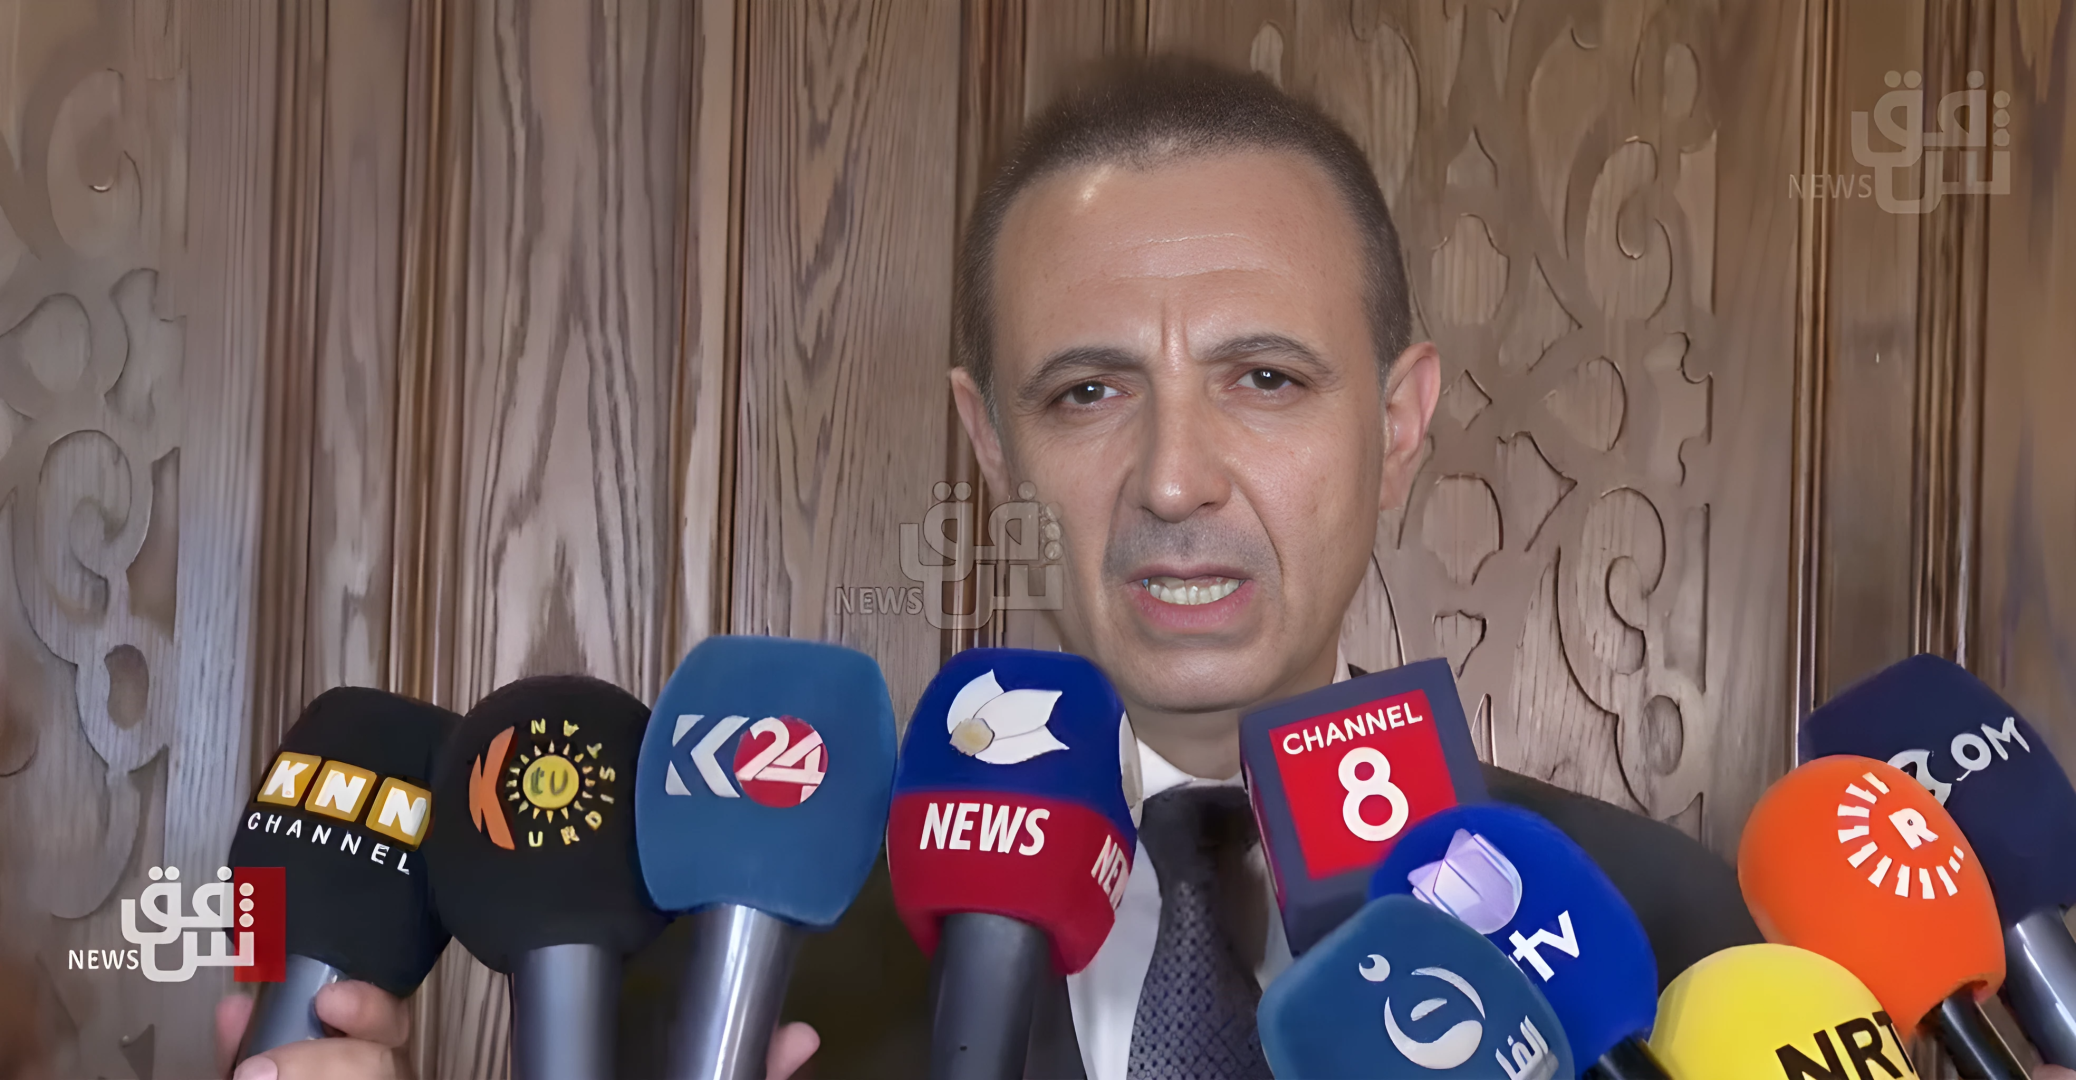 Kurdish parties deny reported compromise on choosing Iraqs justice minister